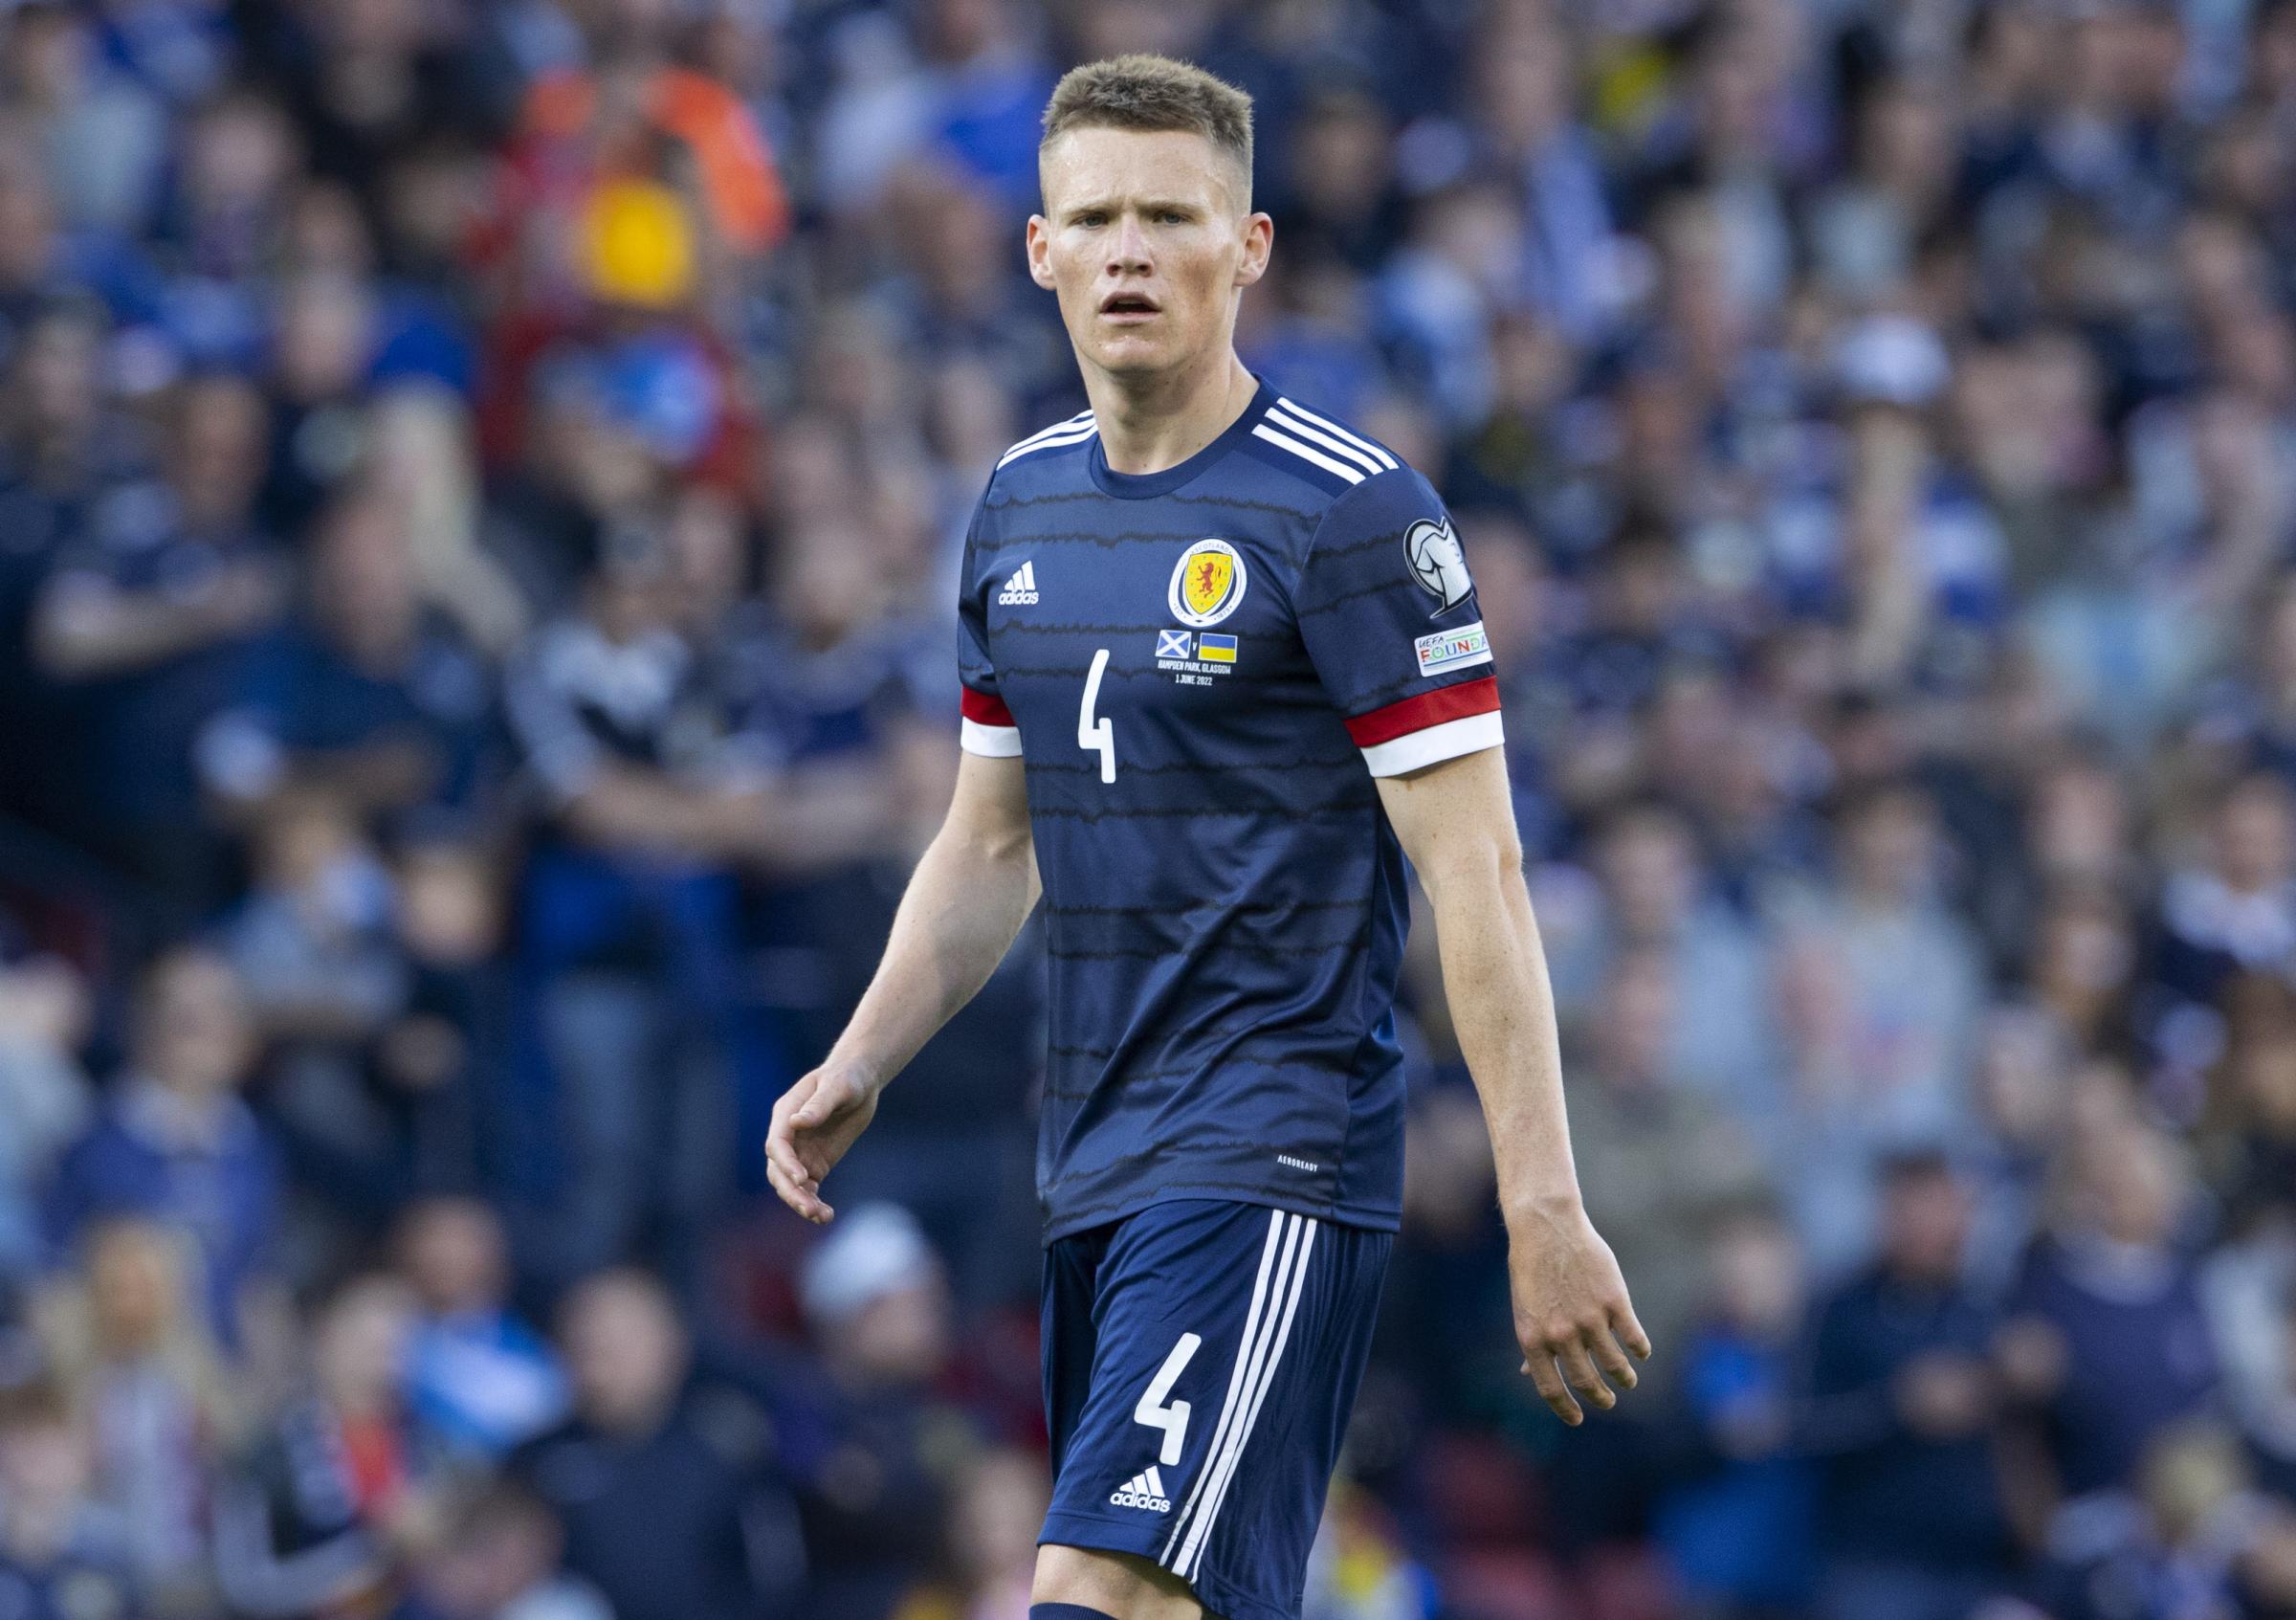 Rangers' John Souttar should start ahead of Manchester United ace Scott McTominay, claims pundit